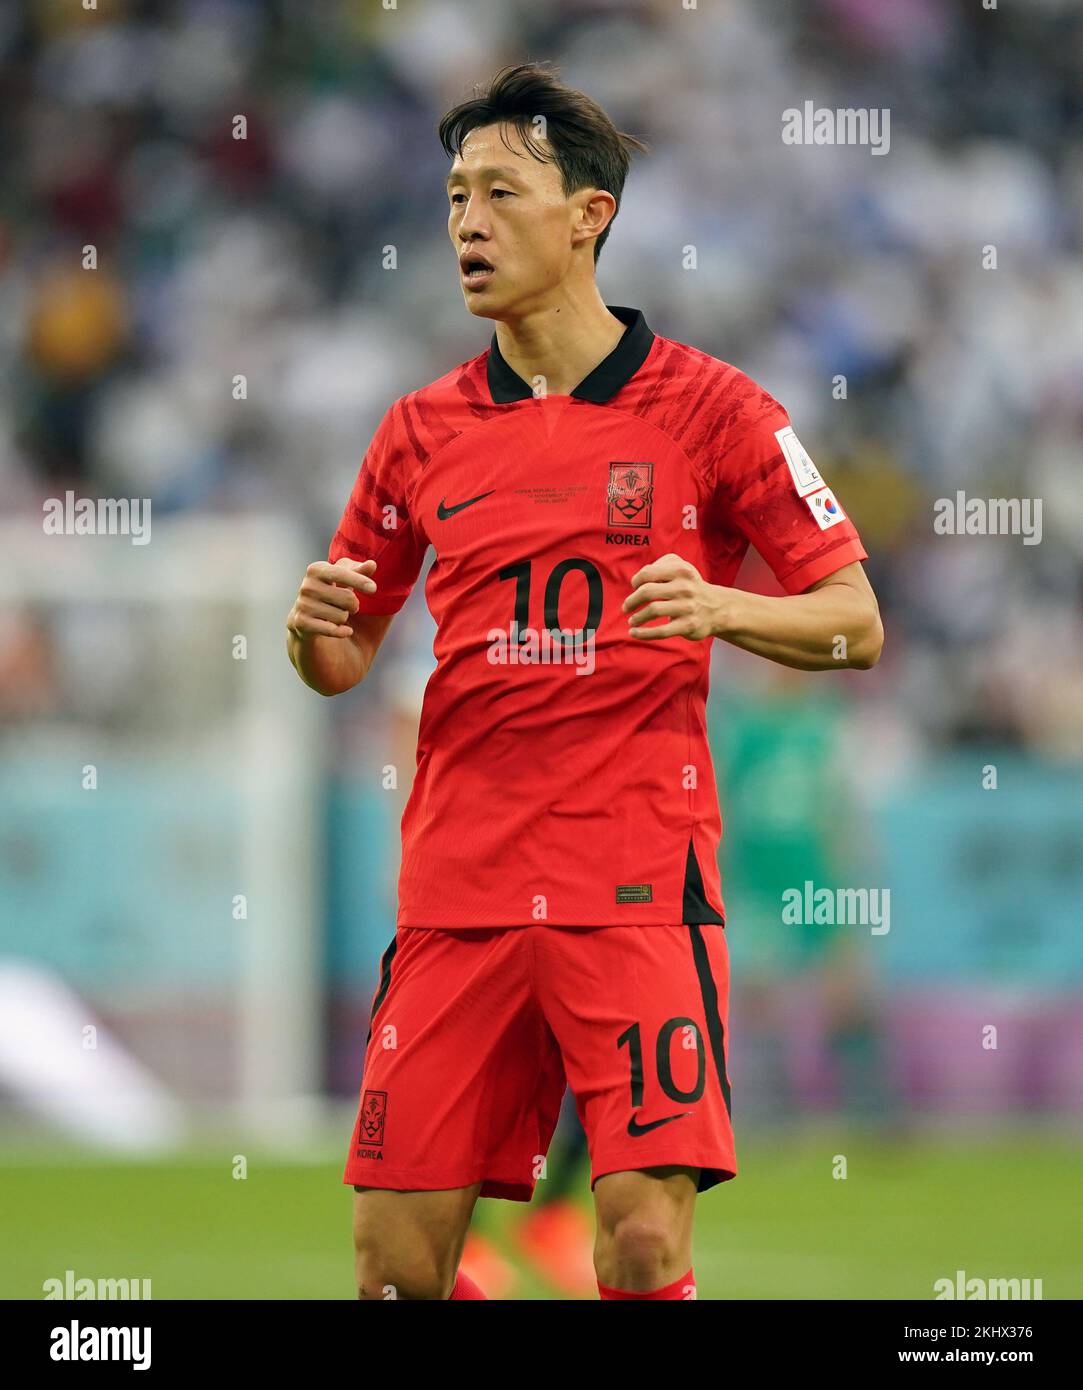 South Korea's Lee Jae-sung during the FIFA World Cup Group H match at the Education City Stadium, Doha, Qatar. Picture date: Thursday November 24, 2022. Stock Photo